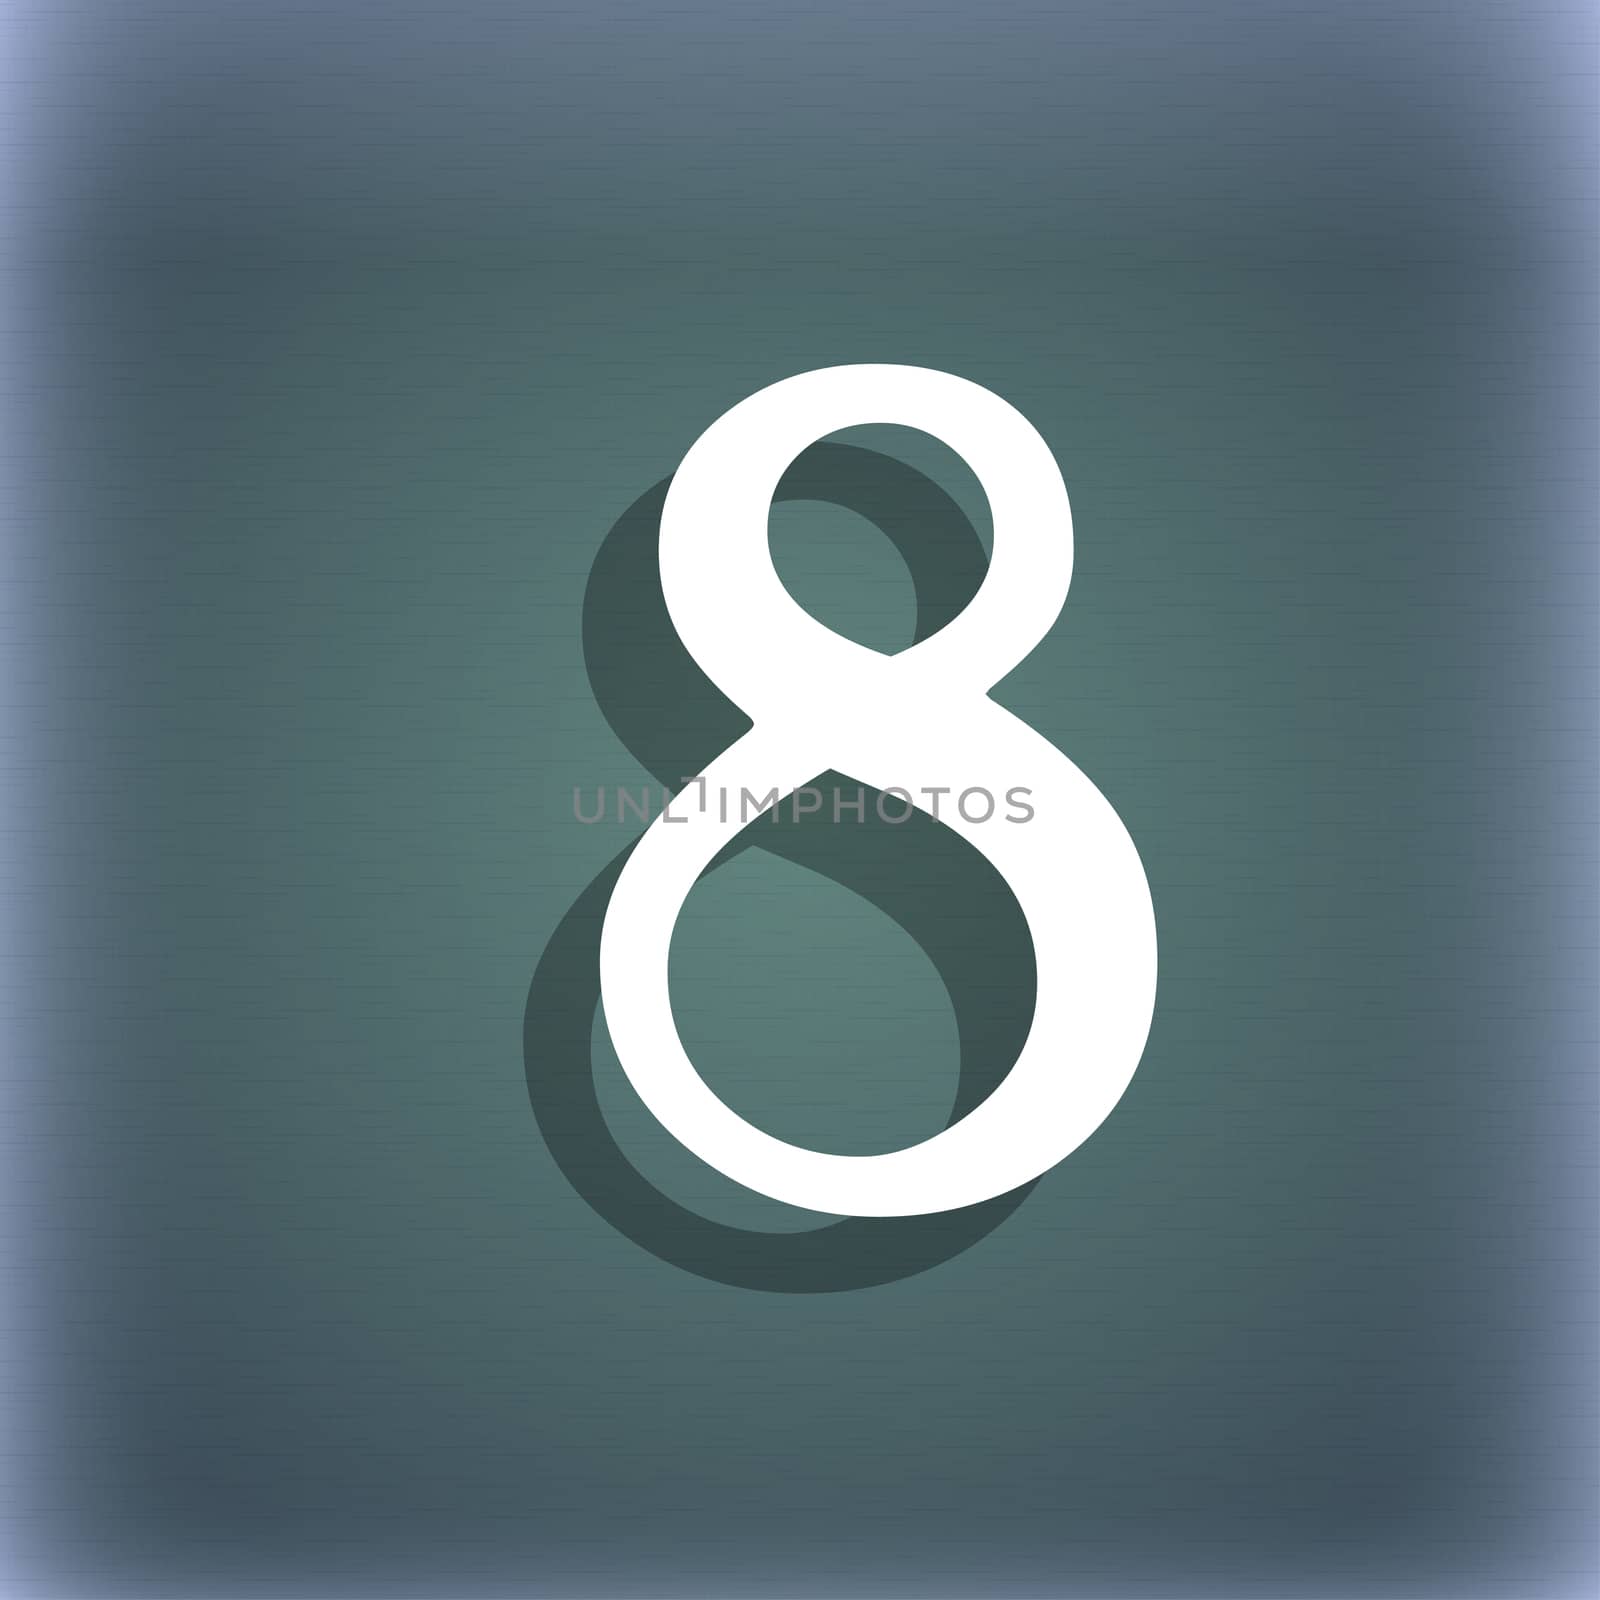 number Eight icon sign. On the blue-green abstract background with shadow and space for your text. illustration